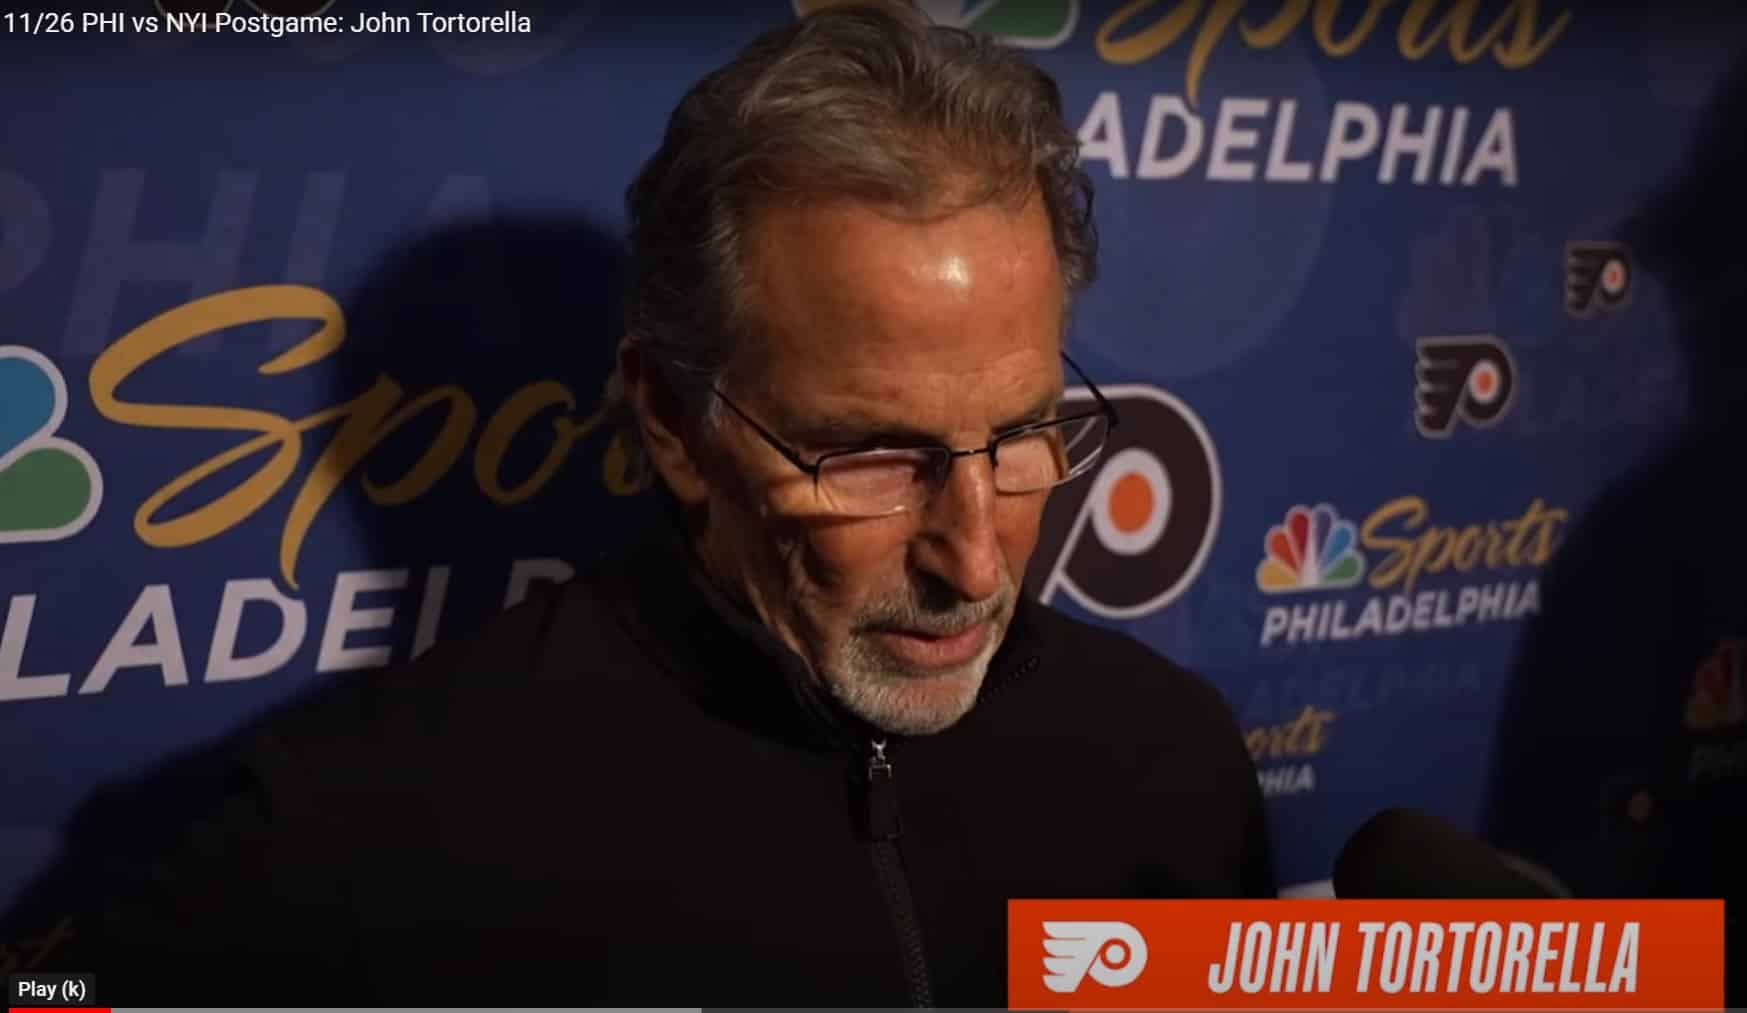 Some Thoughts on the John Tortorella New York Postgame Media Scrum (a Non-Controversy)